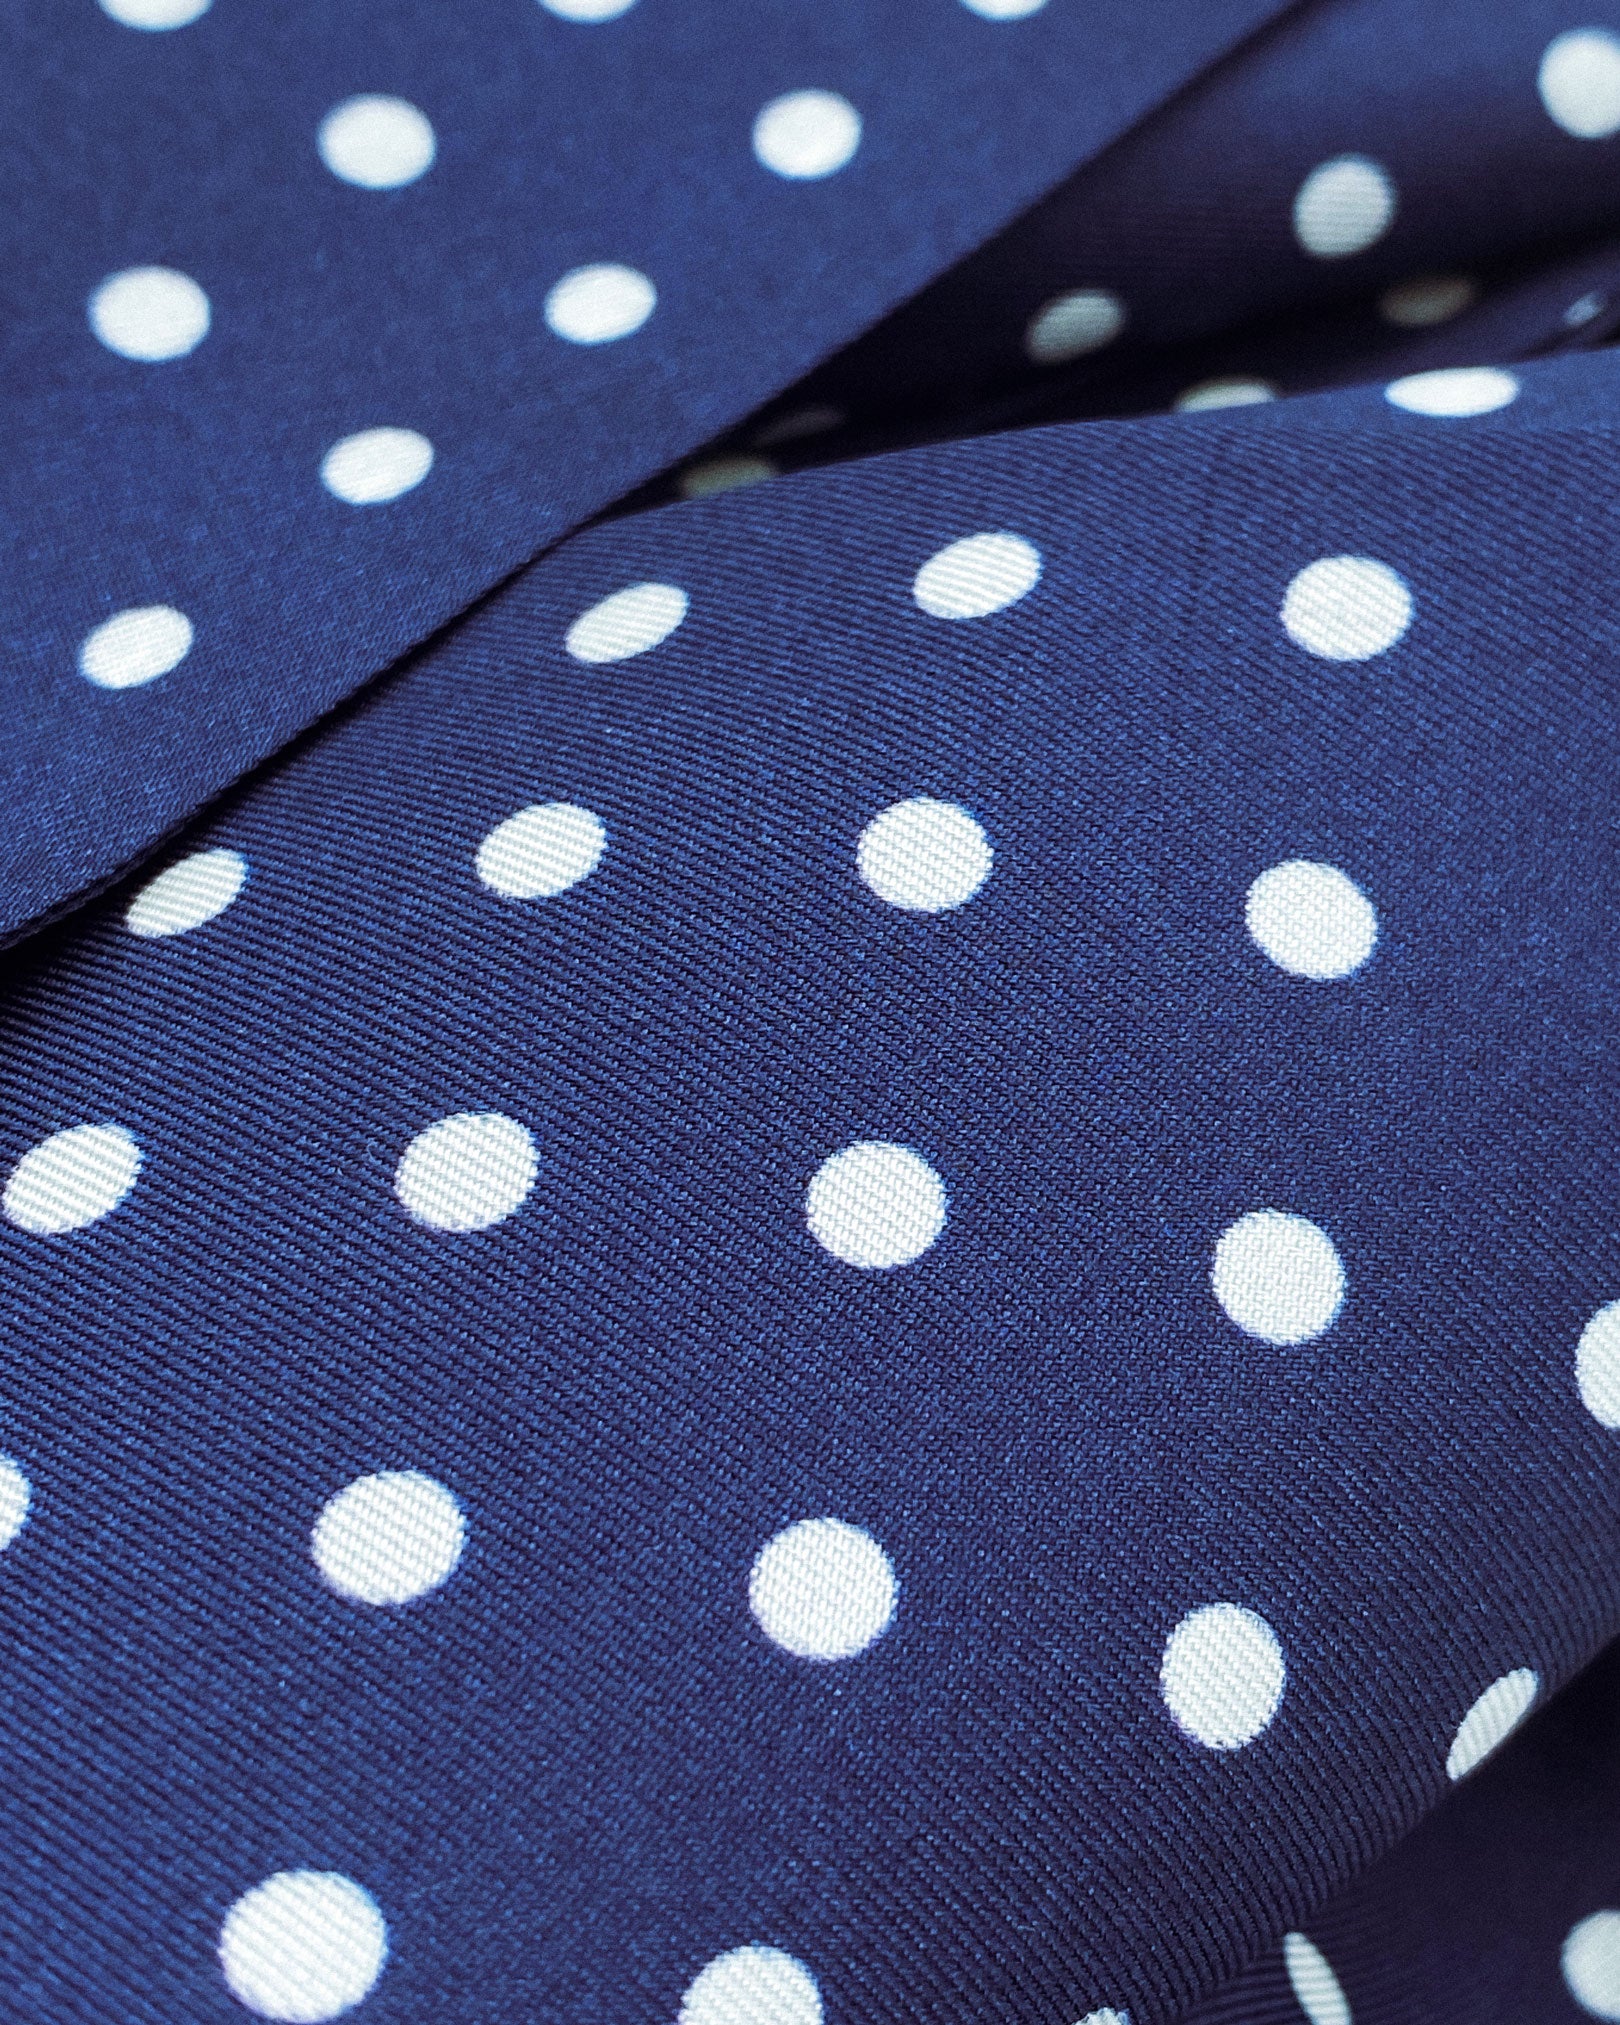 Ruffled close-up view of the 'Westminster' silk aviator scarf, presenting a closer view of the polka dot design in navy-blue with white spots and subtle lustre of the material.